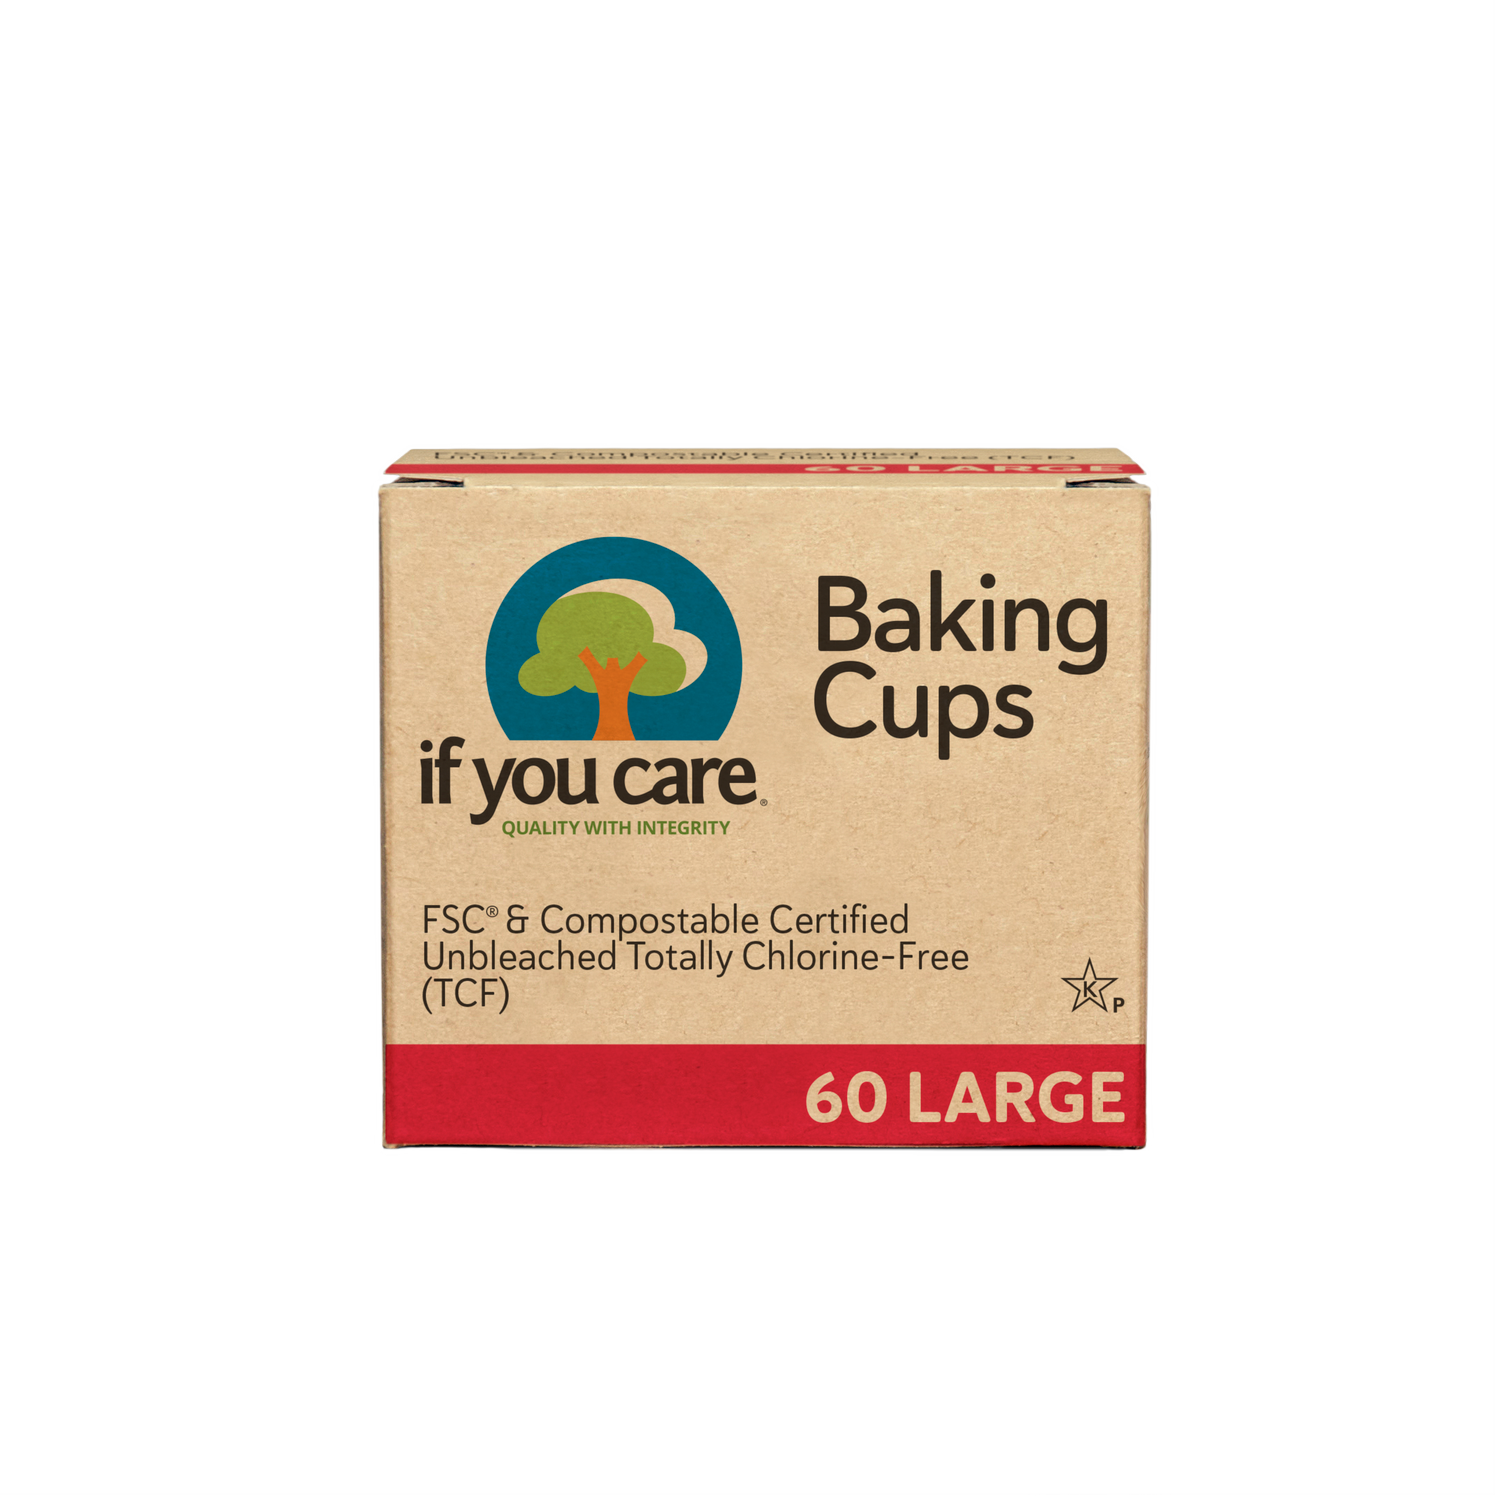 LARGE BAKING CUPS